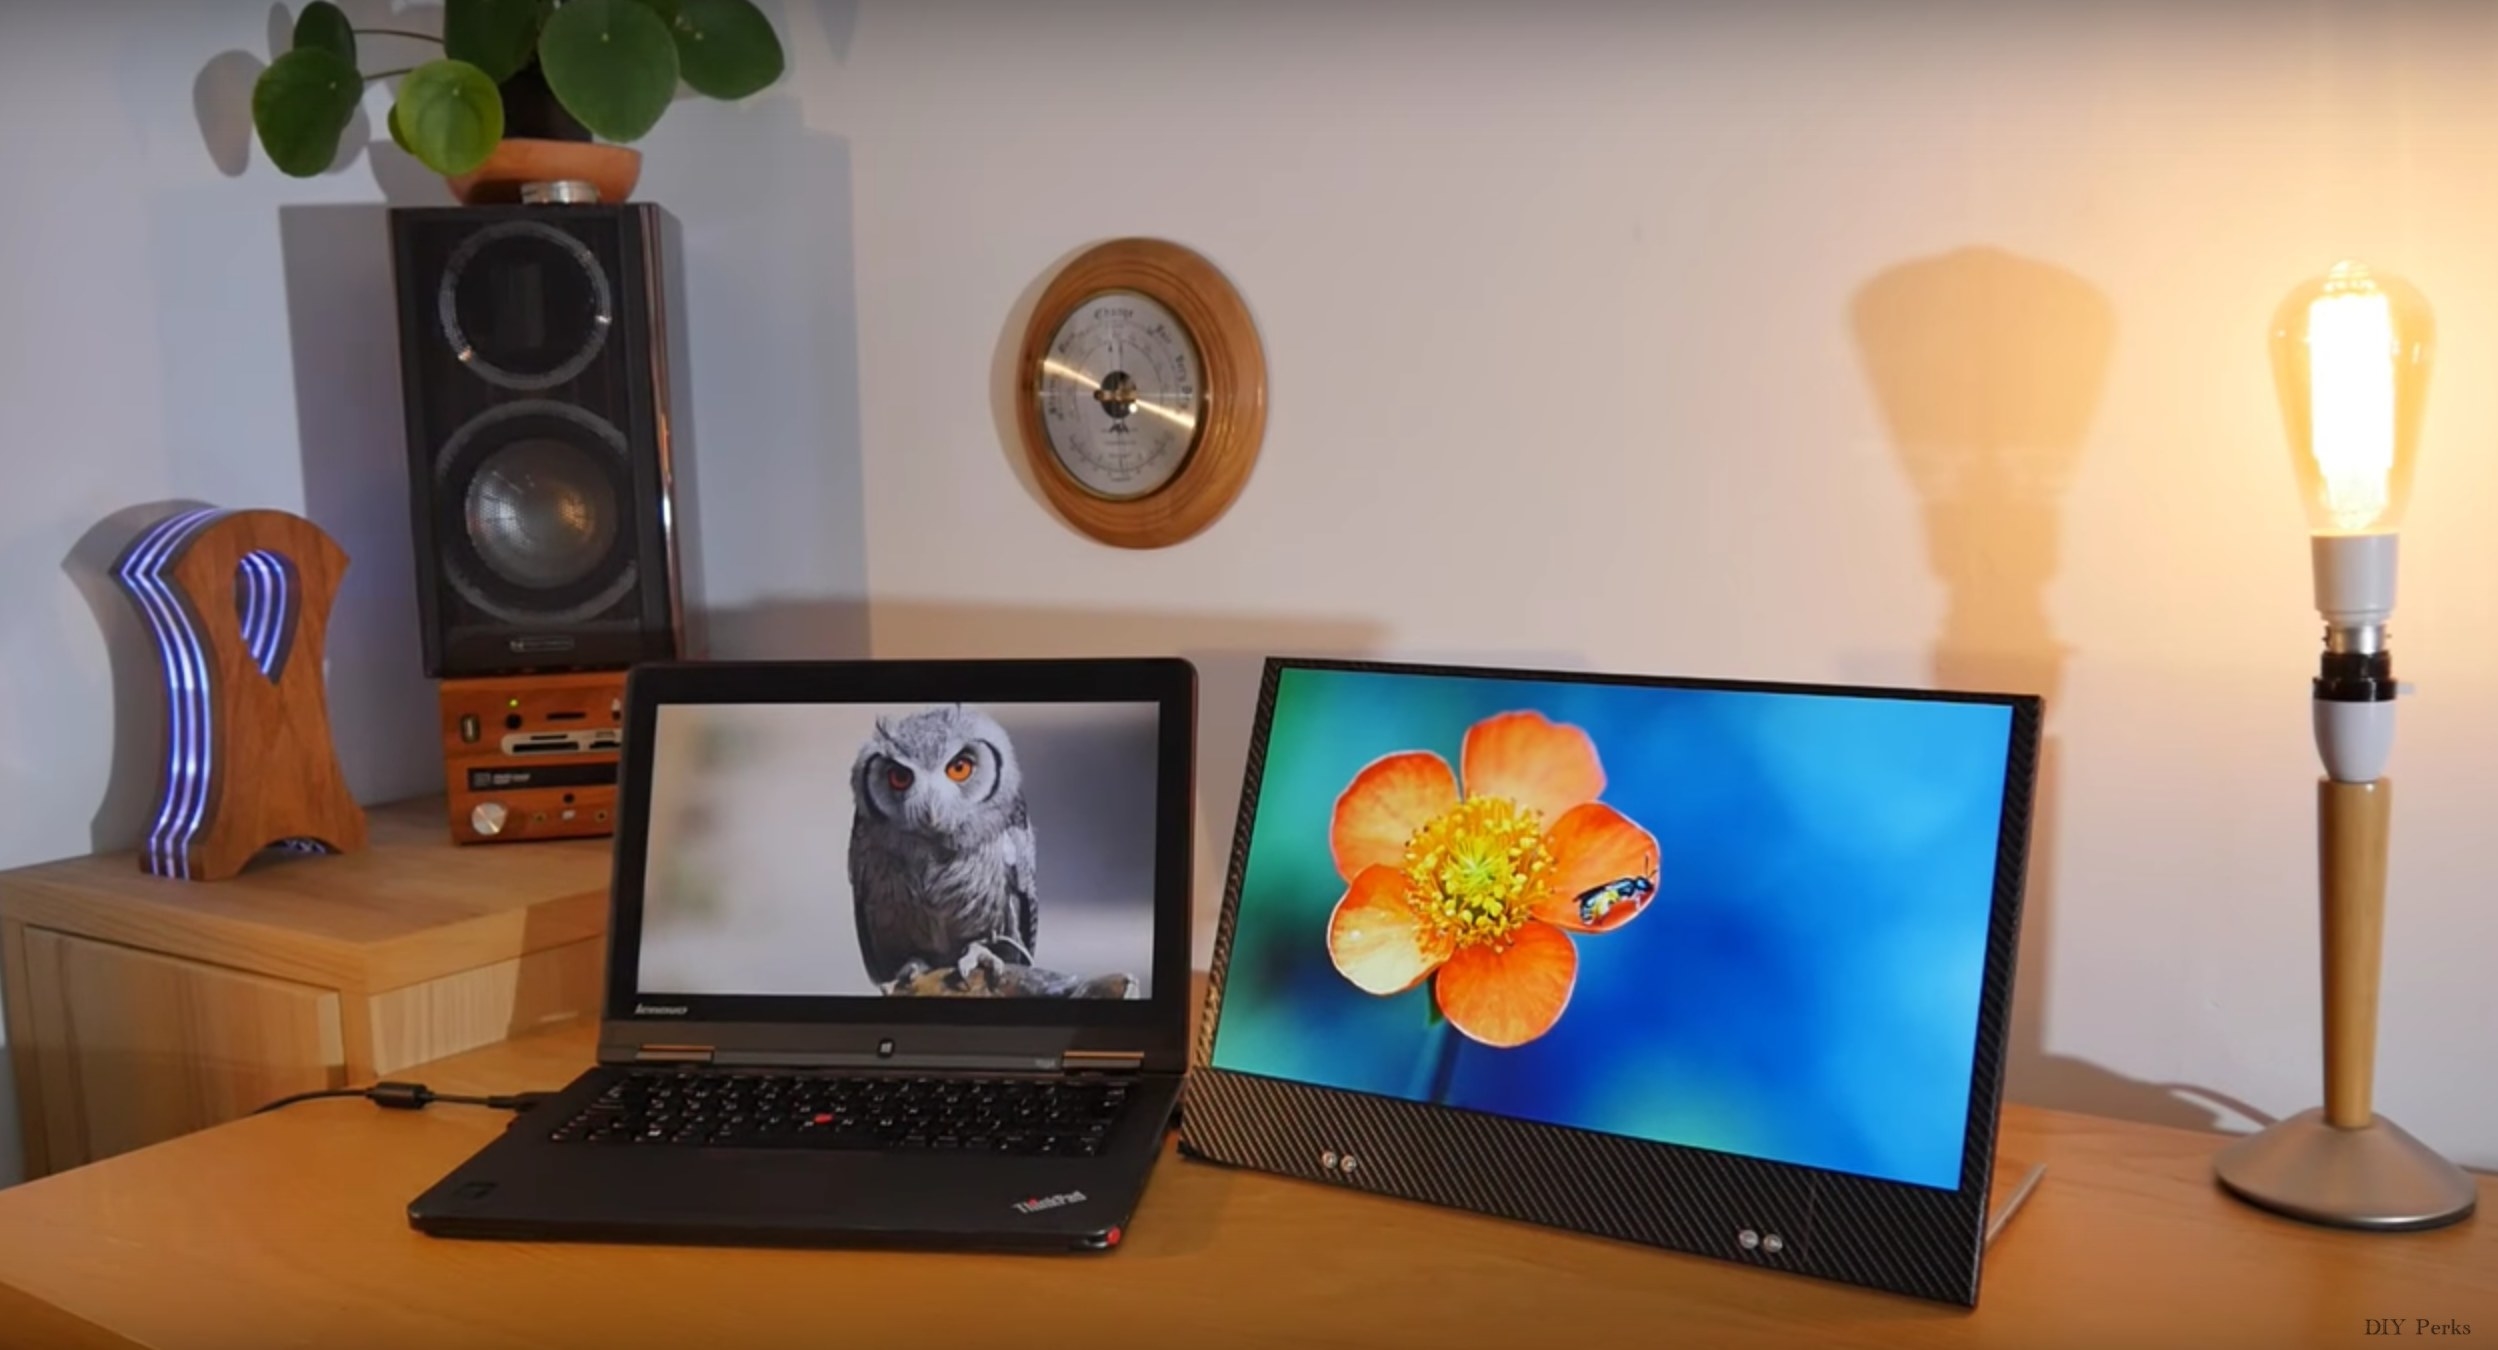 Two screen setup with a laptop and other monitor on a desk